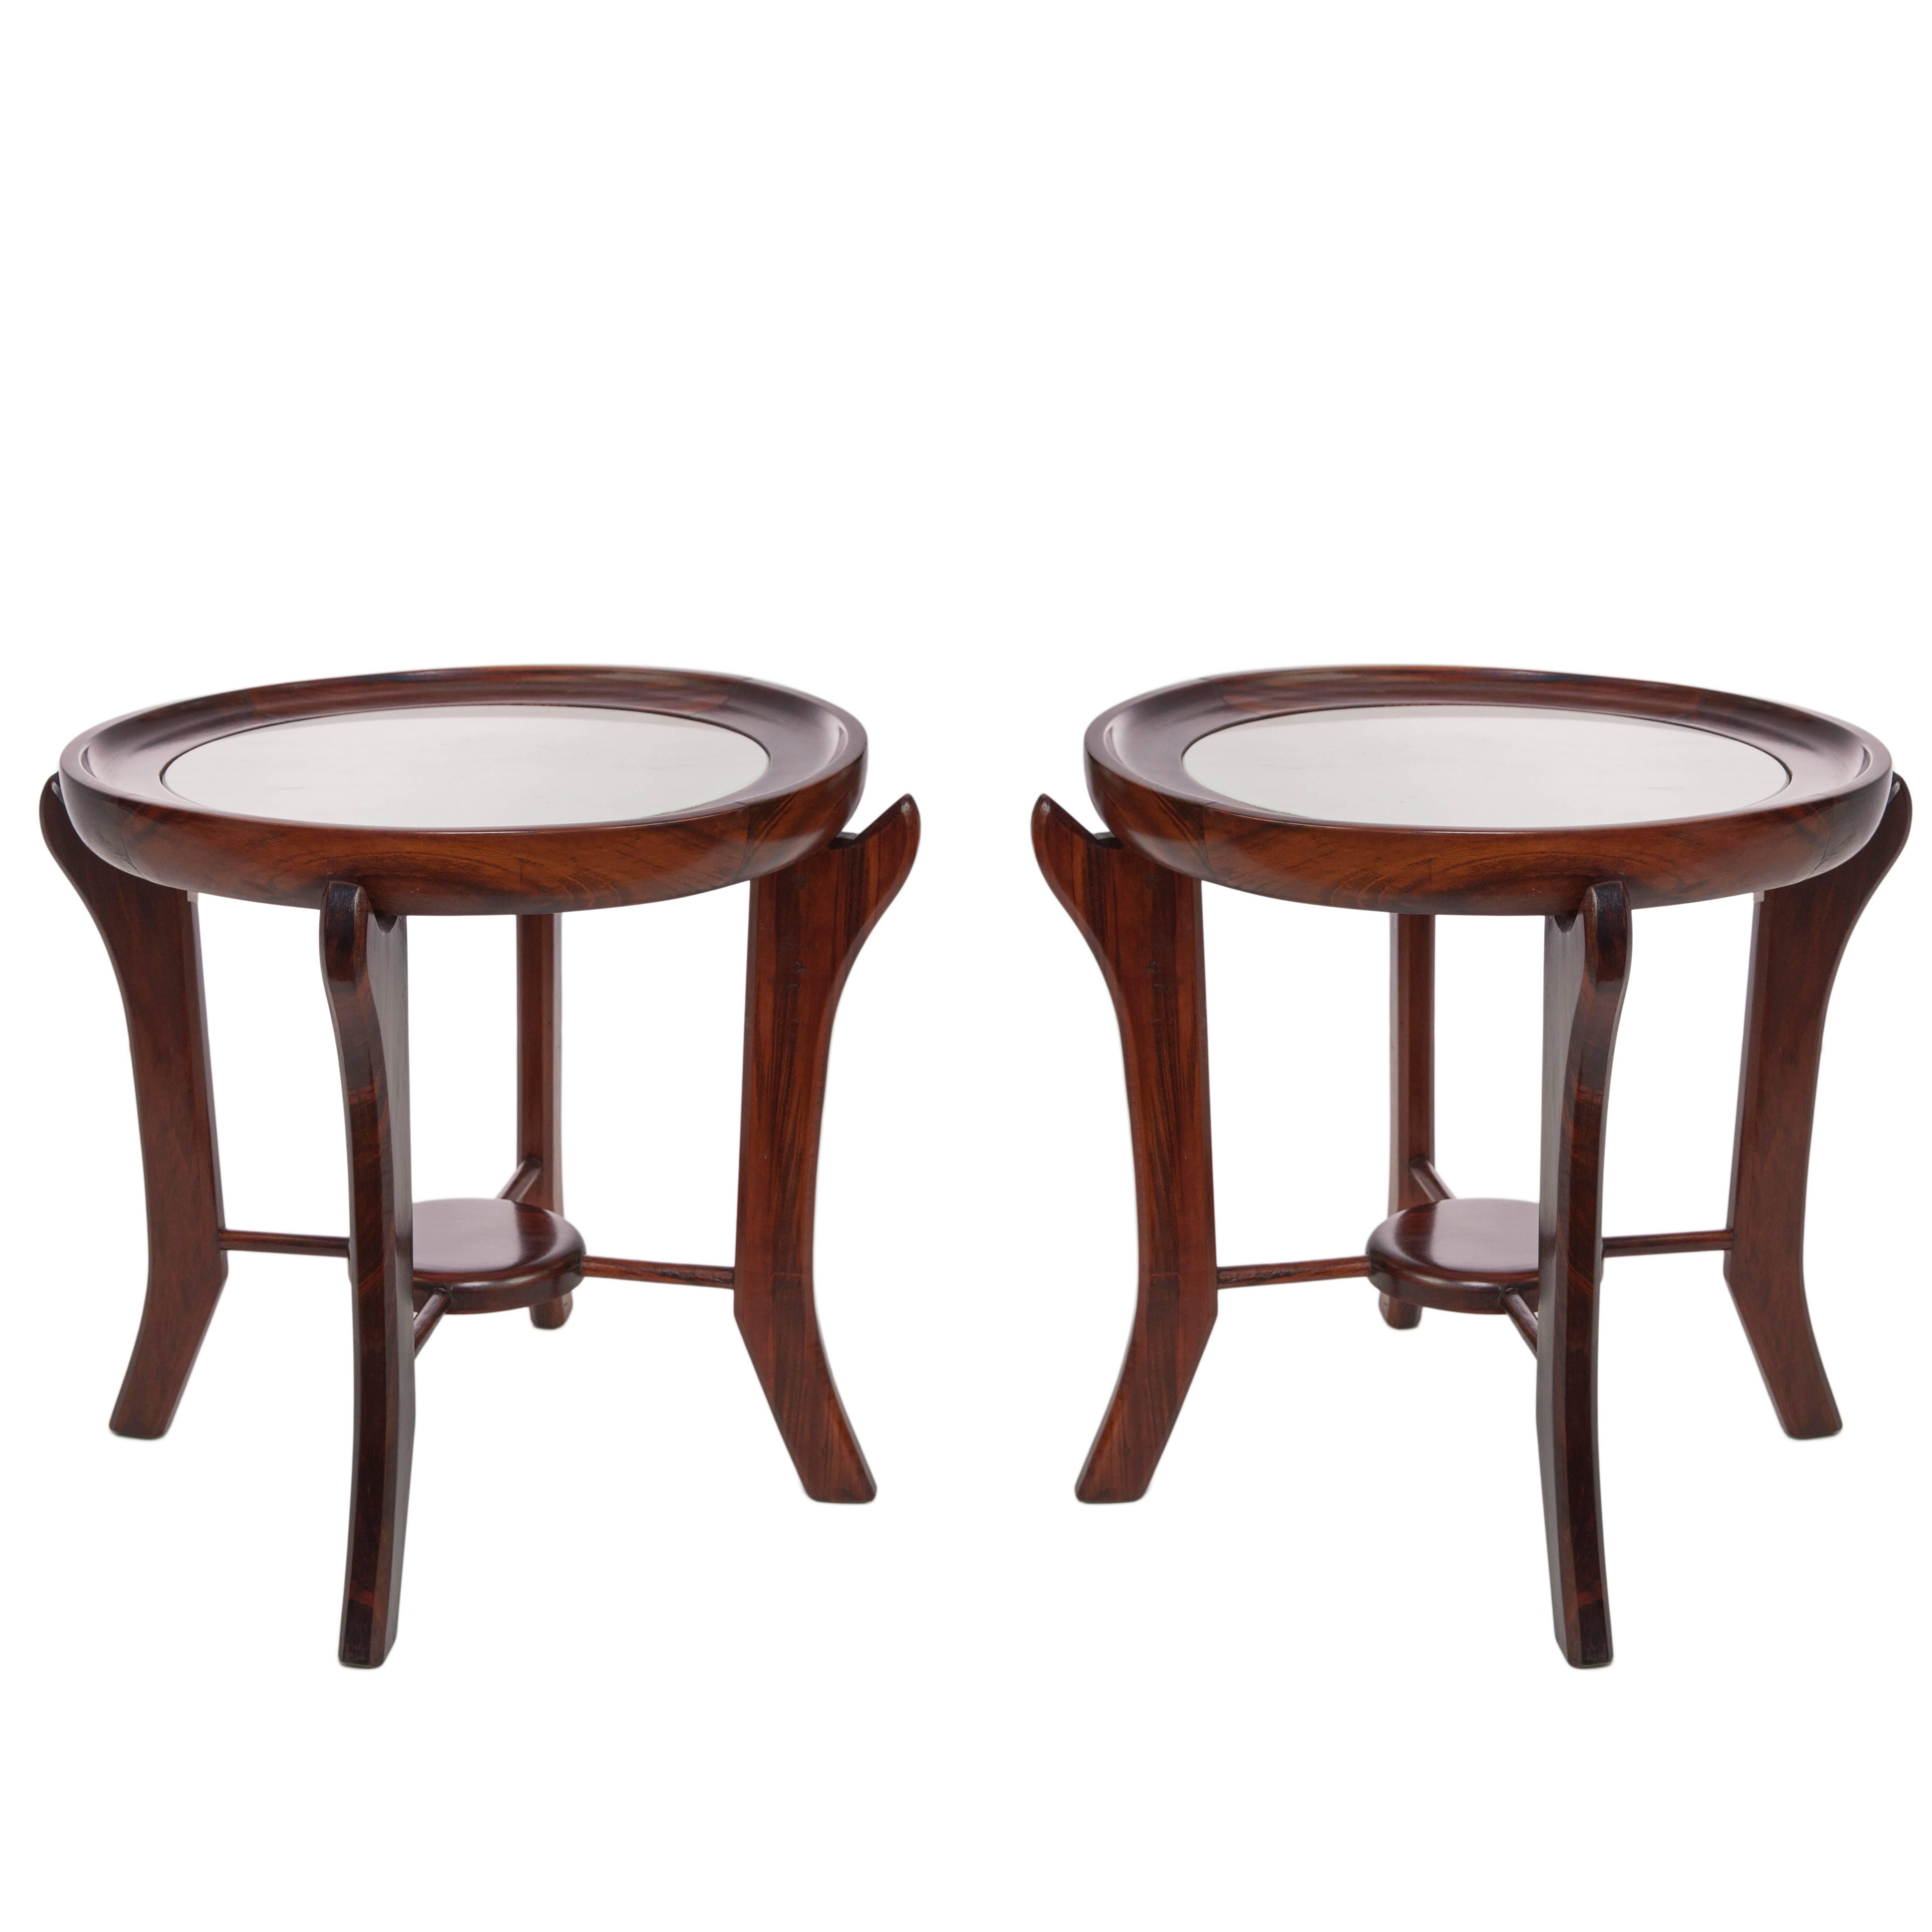 'Maracanã' Side Tables Attributed to Giuseppe Scapinelli